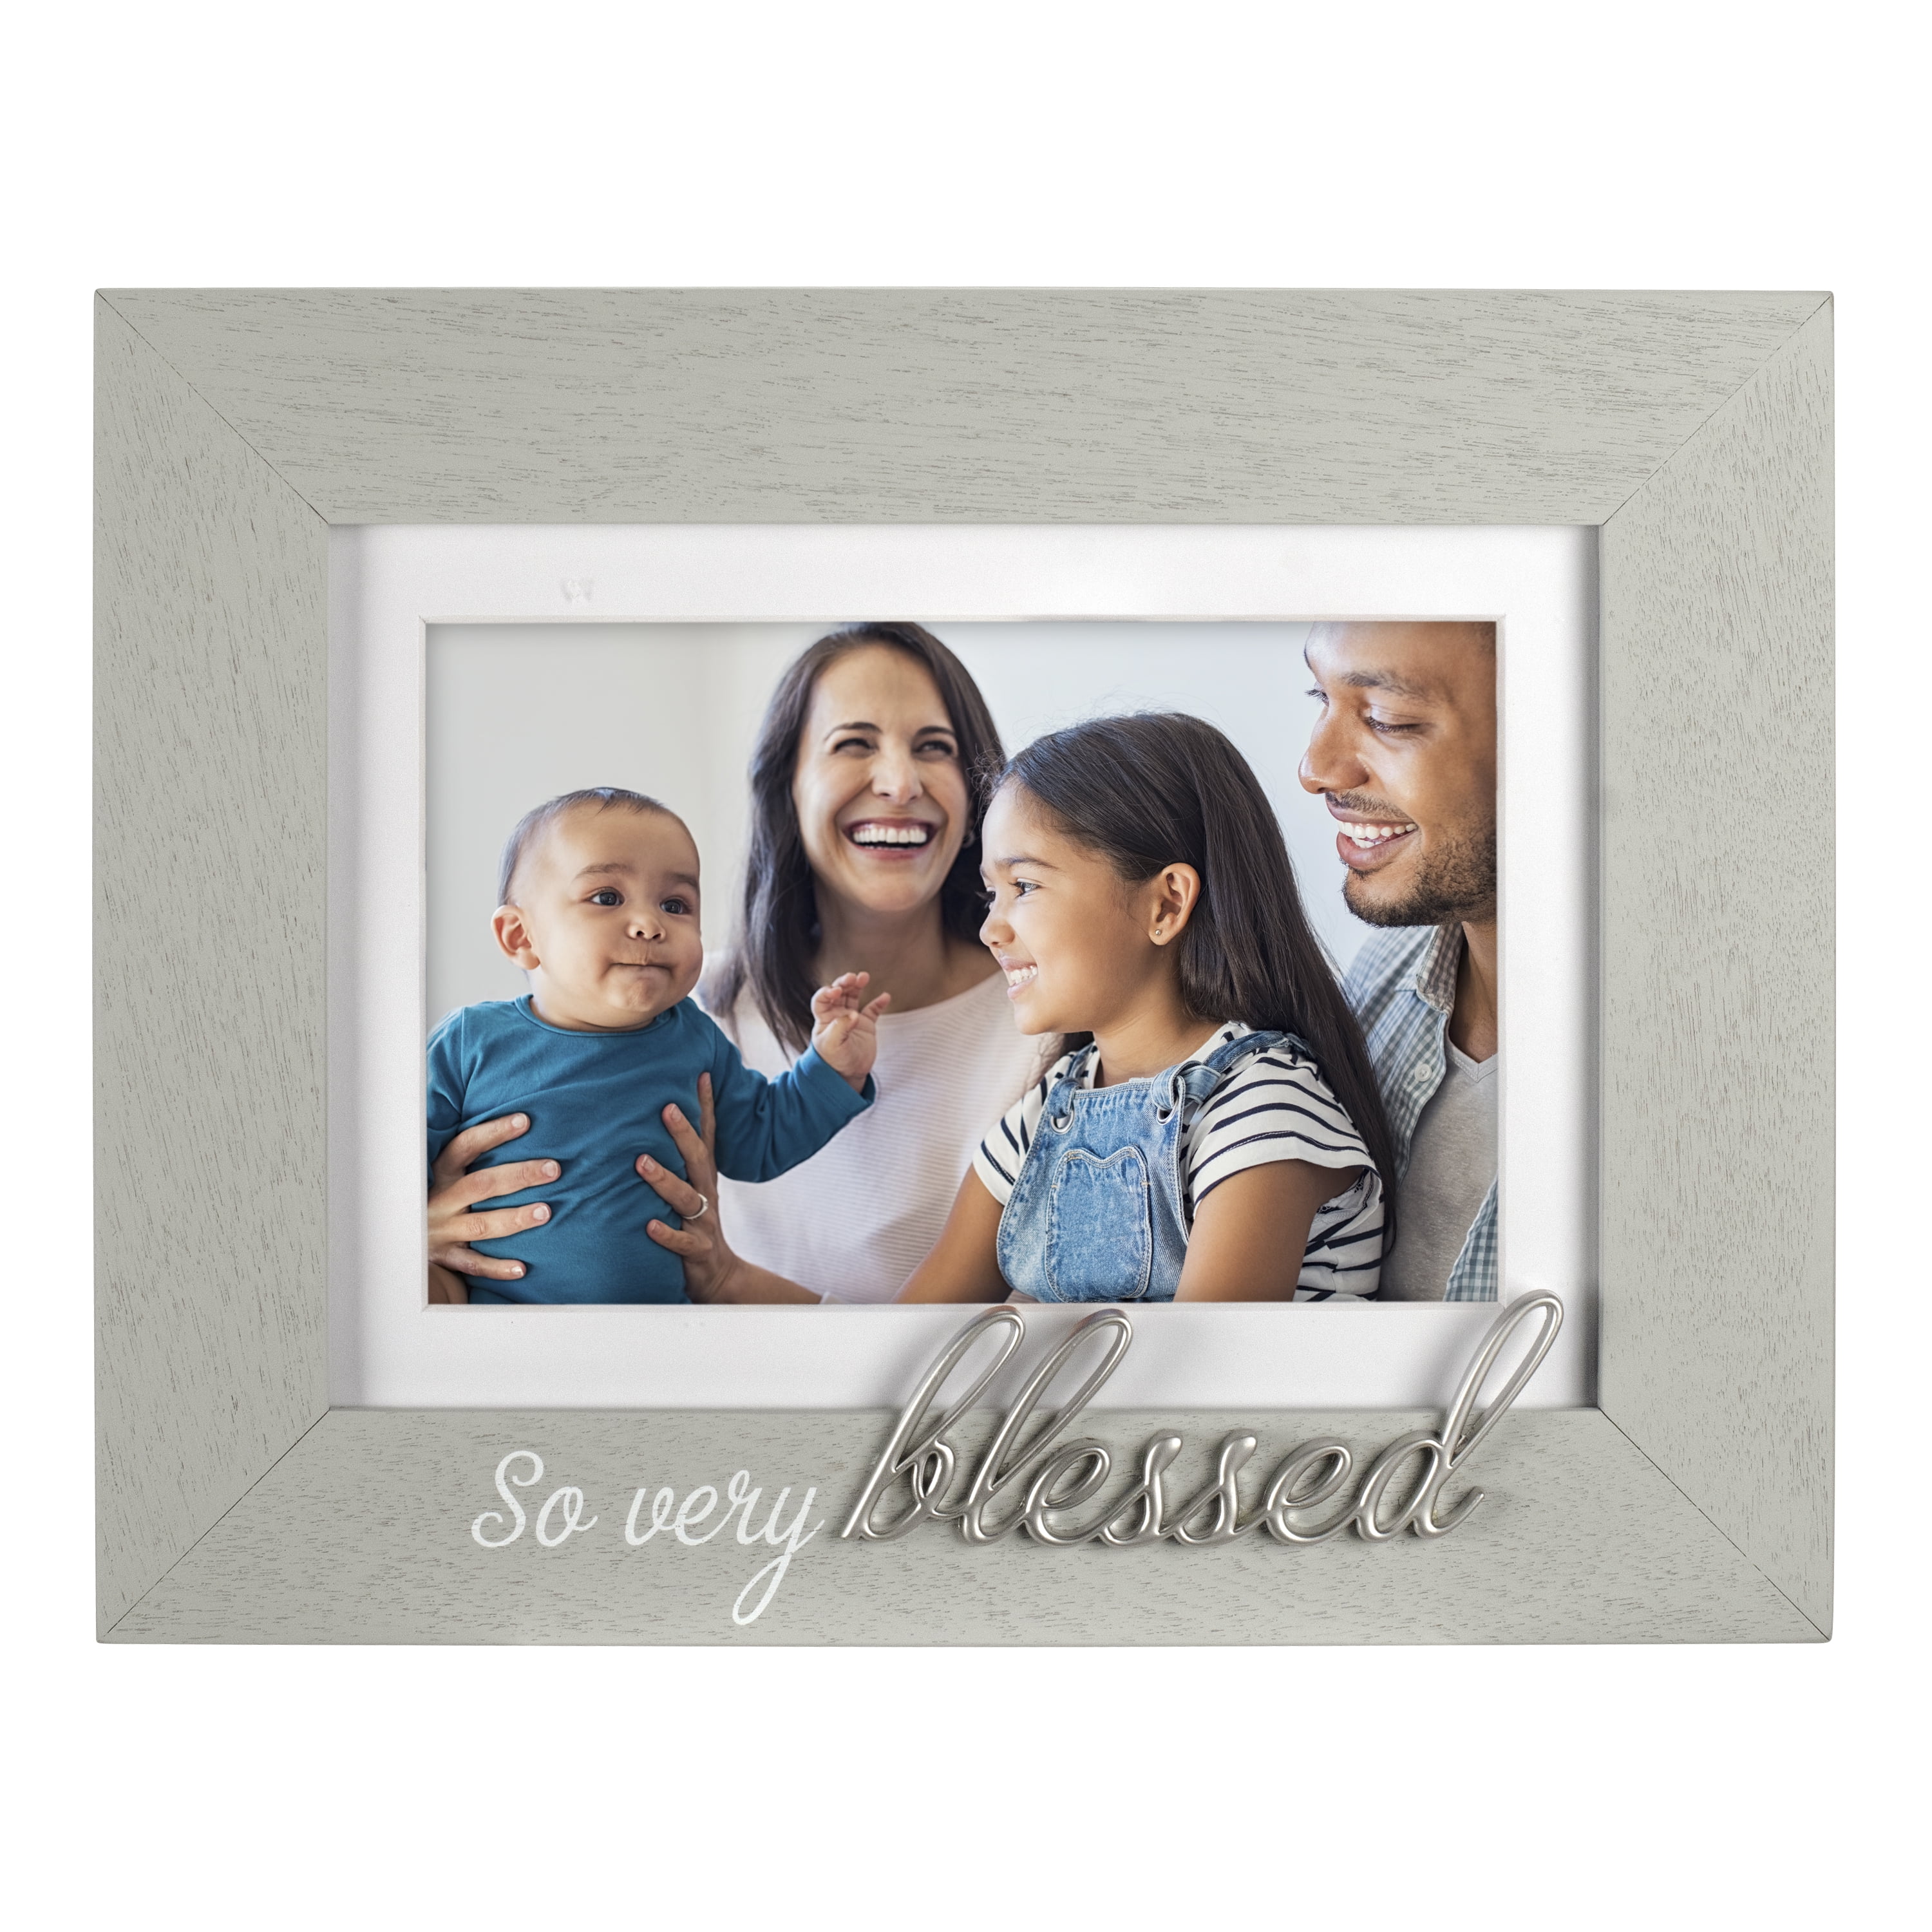 Malden International Designs 4x6 or 5x7 I Love Mom Distressed Expressions  Picture Frame Silver Finish I Love Mom Word Attachment Gray Textured Wood